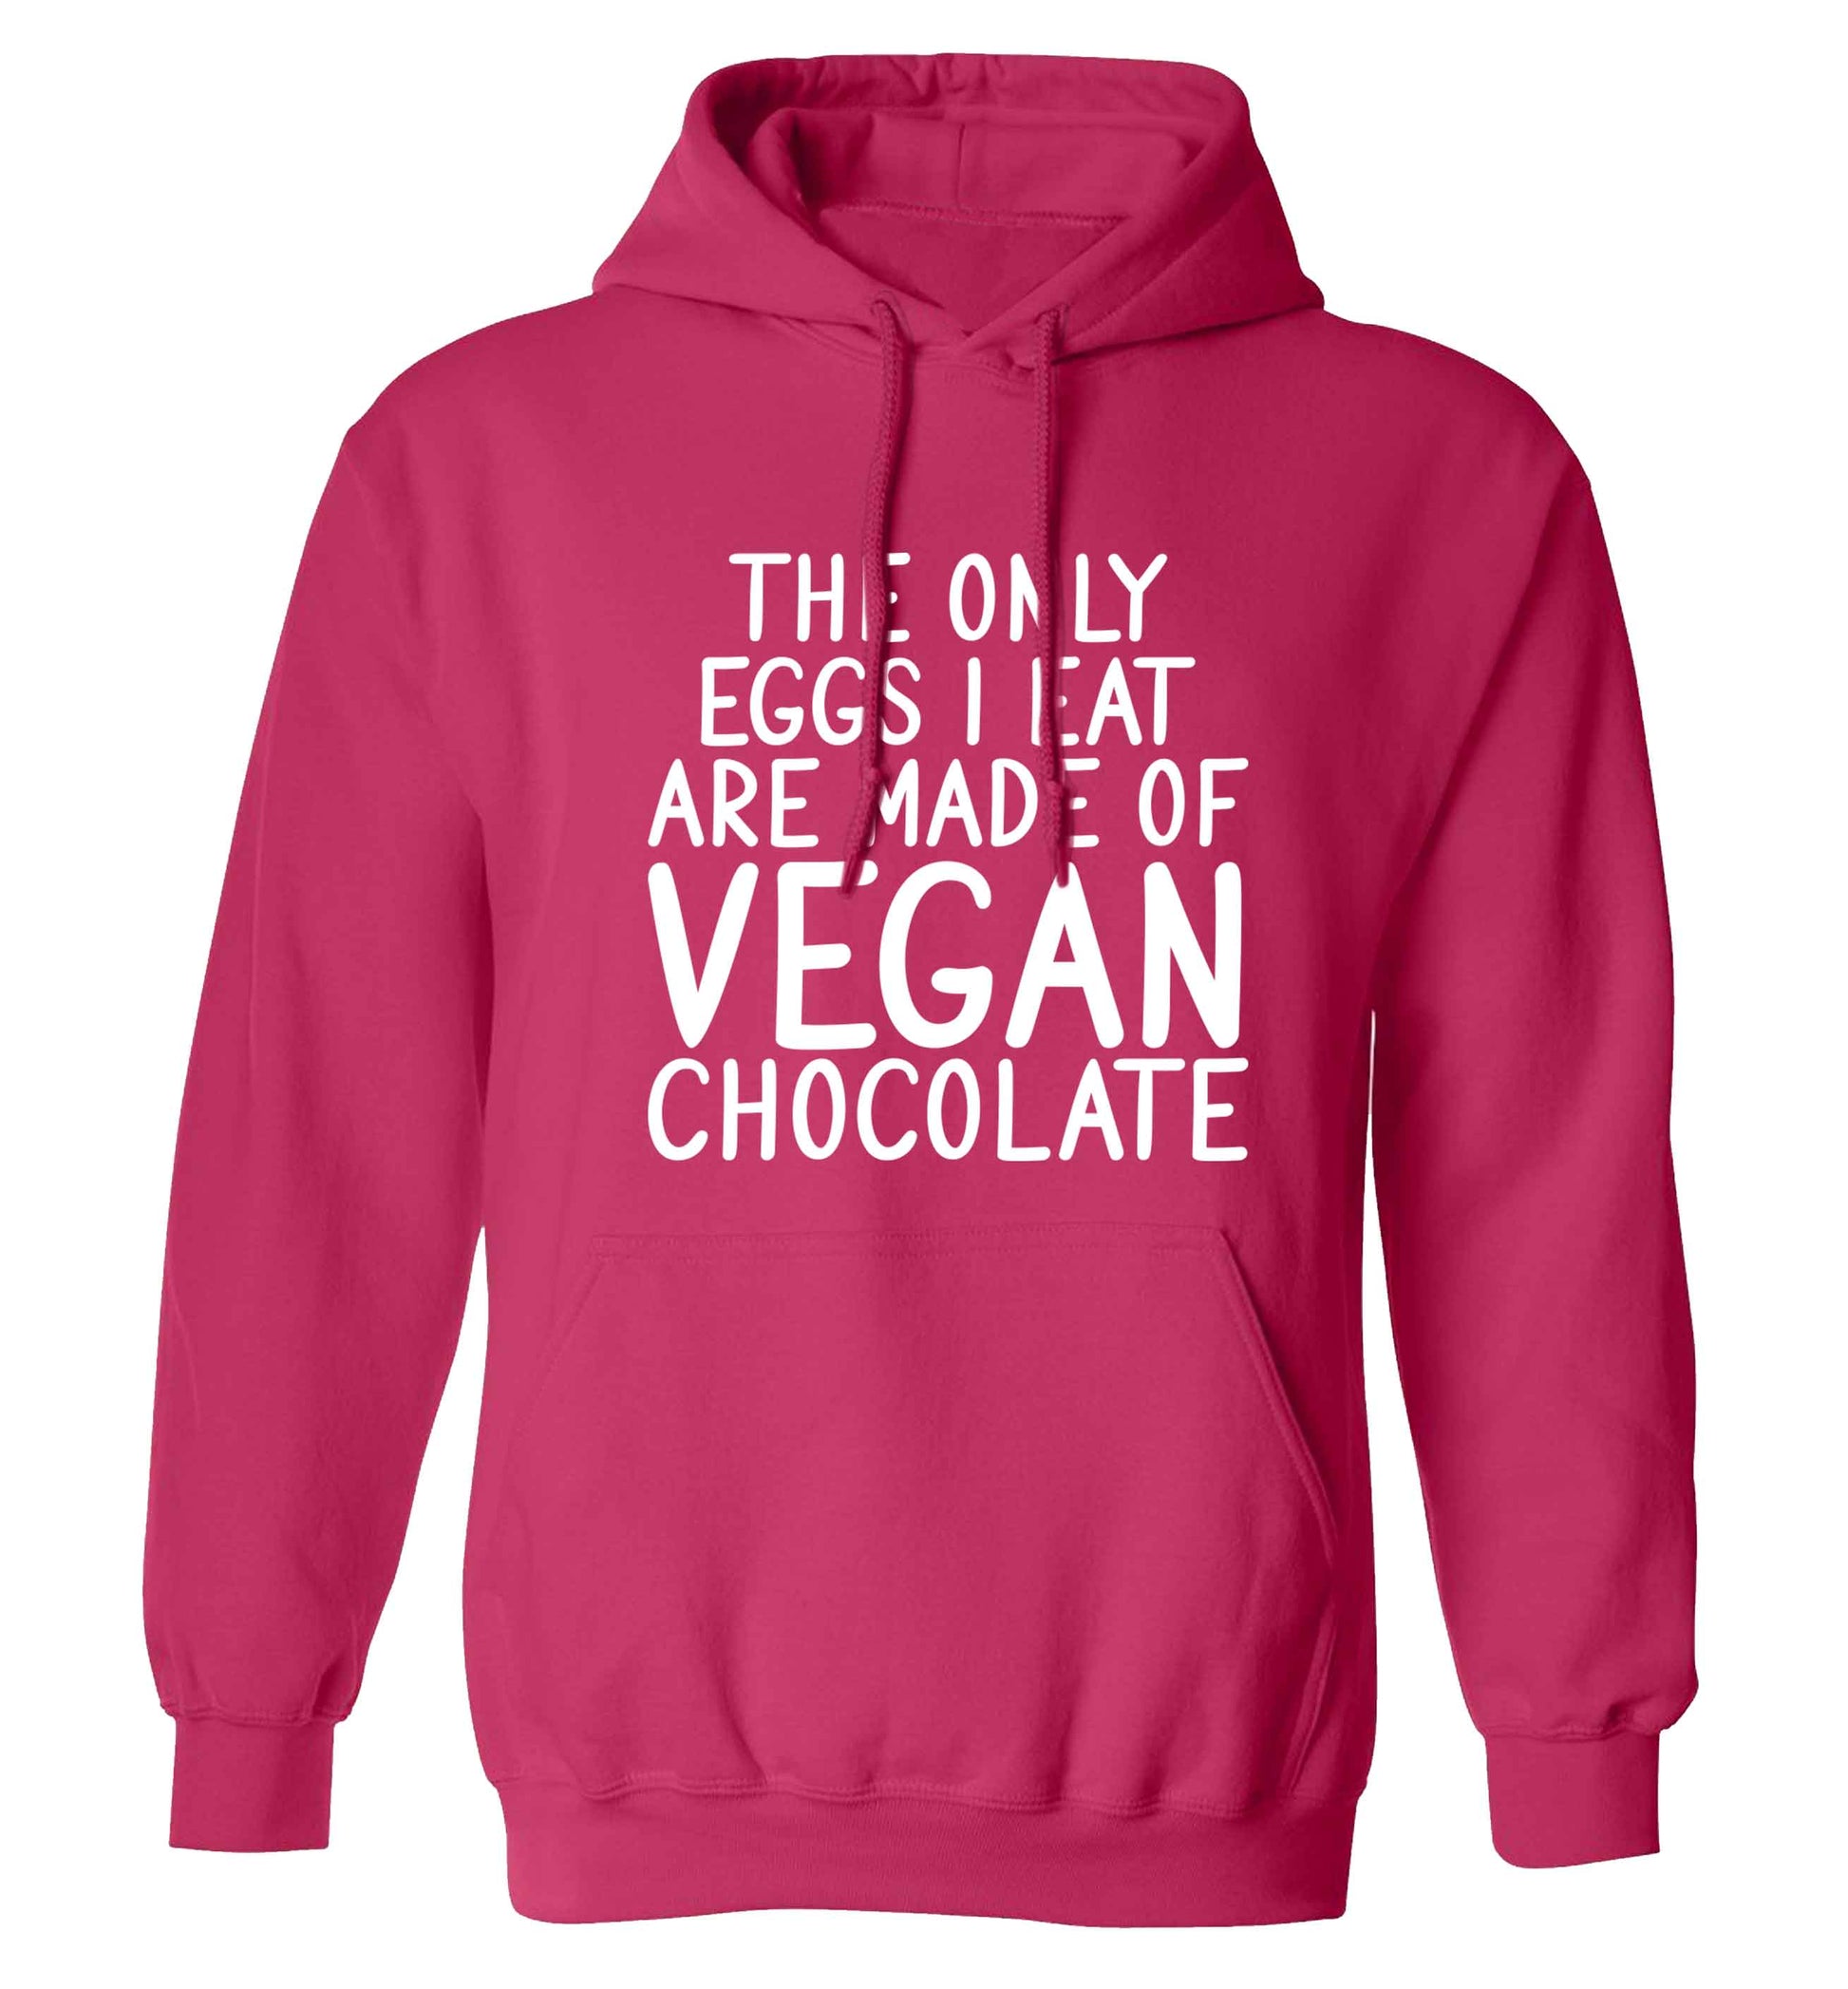 The only eggs I eat are made of vegan chocolate adults unisex pink hoodie 2XL